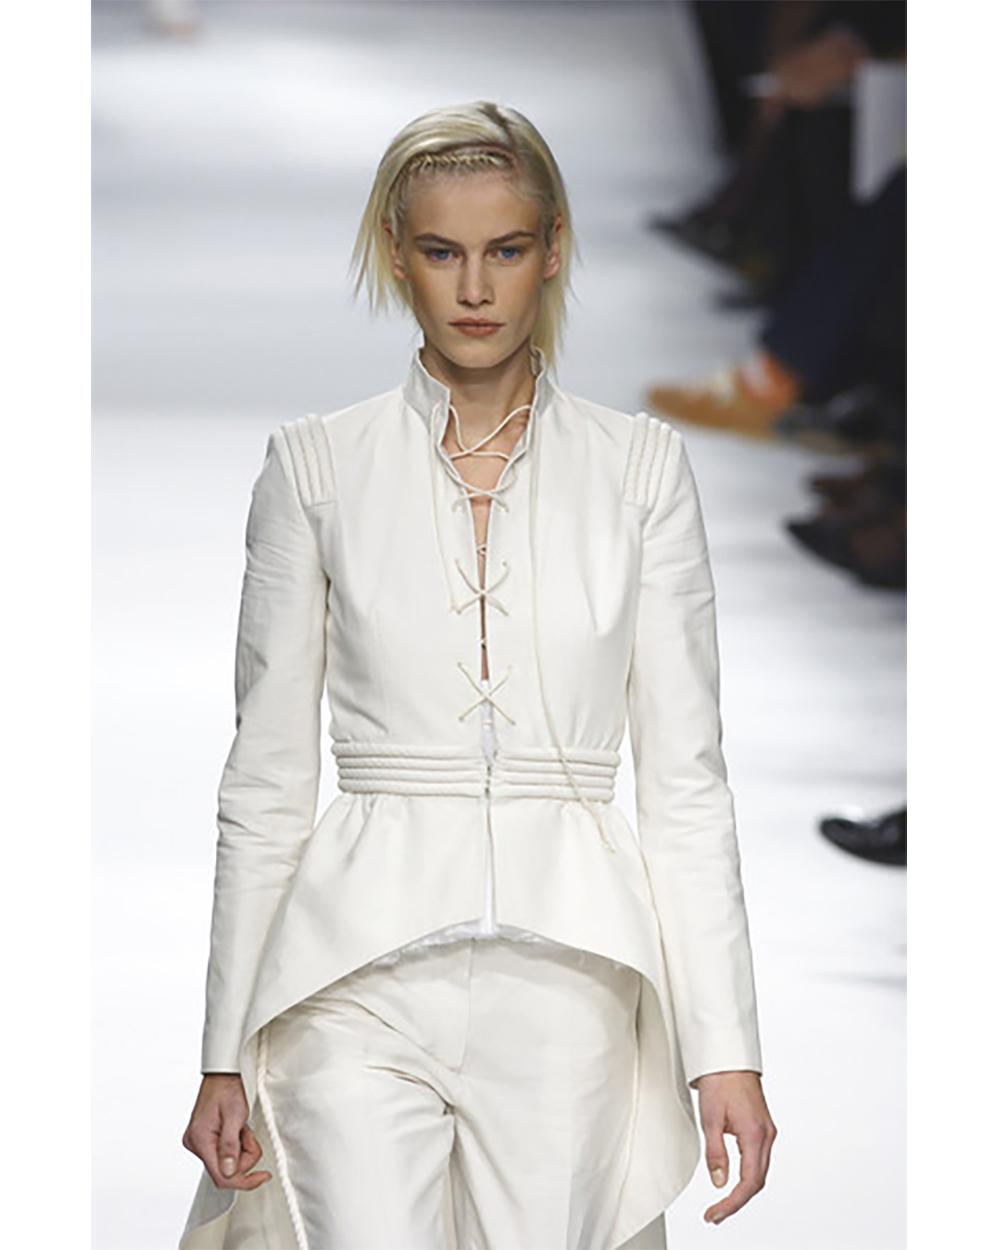 S/S 2002 Givenchy cream cotton suit set with high-low jacket and slim fit pants. Cadet-style coat with long tails, stand collar, rope shoulder and waist detailing. Lace front closure. Pants trimmed with covered rope, with front fly closure. As seen